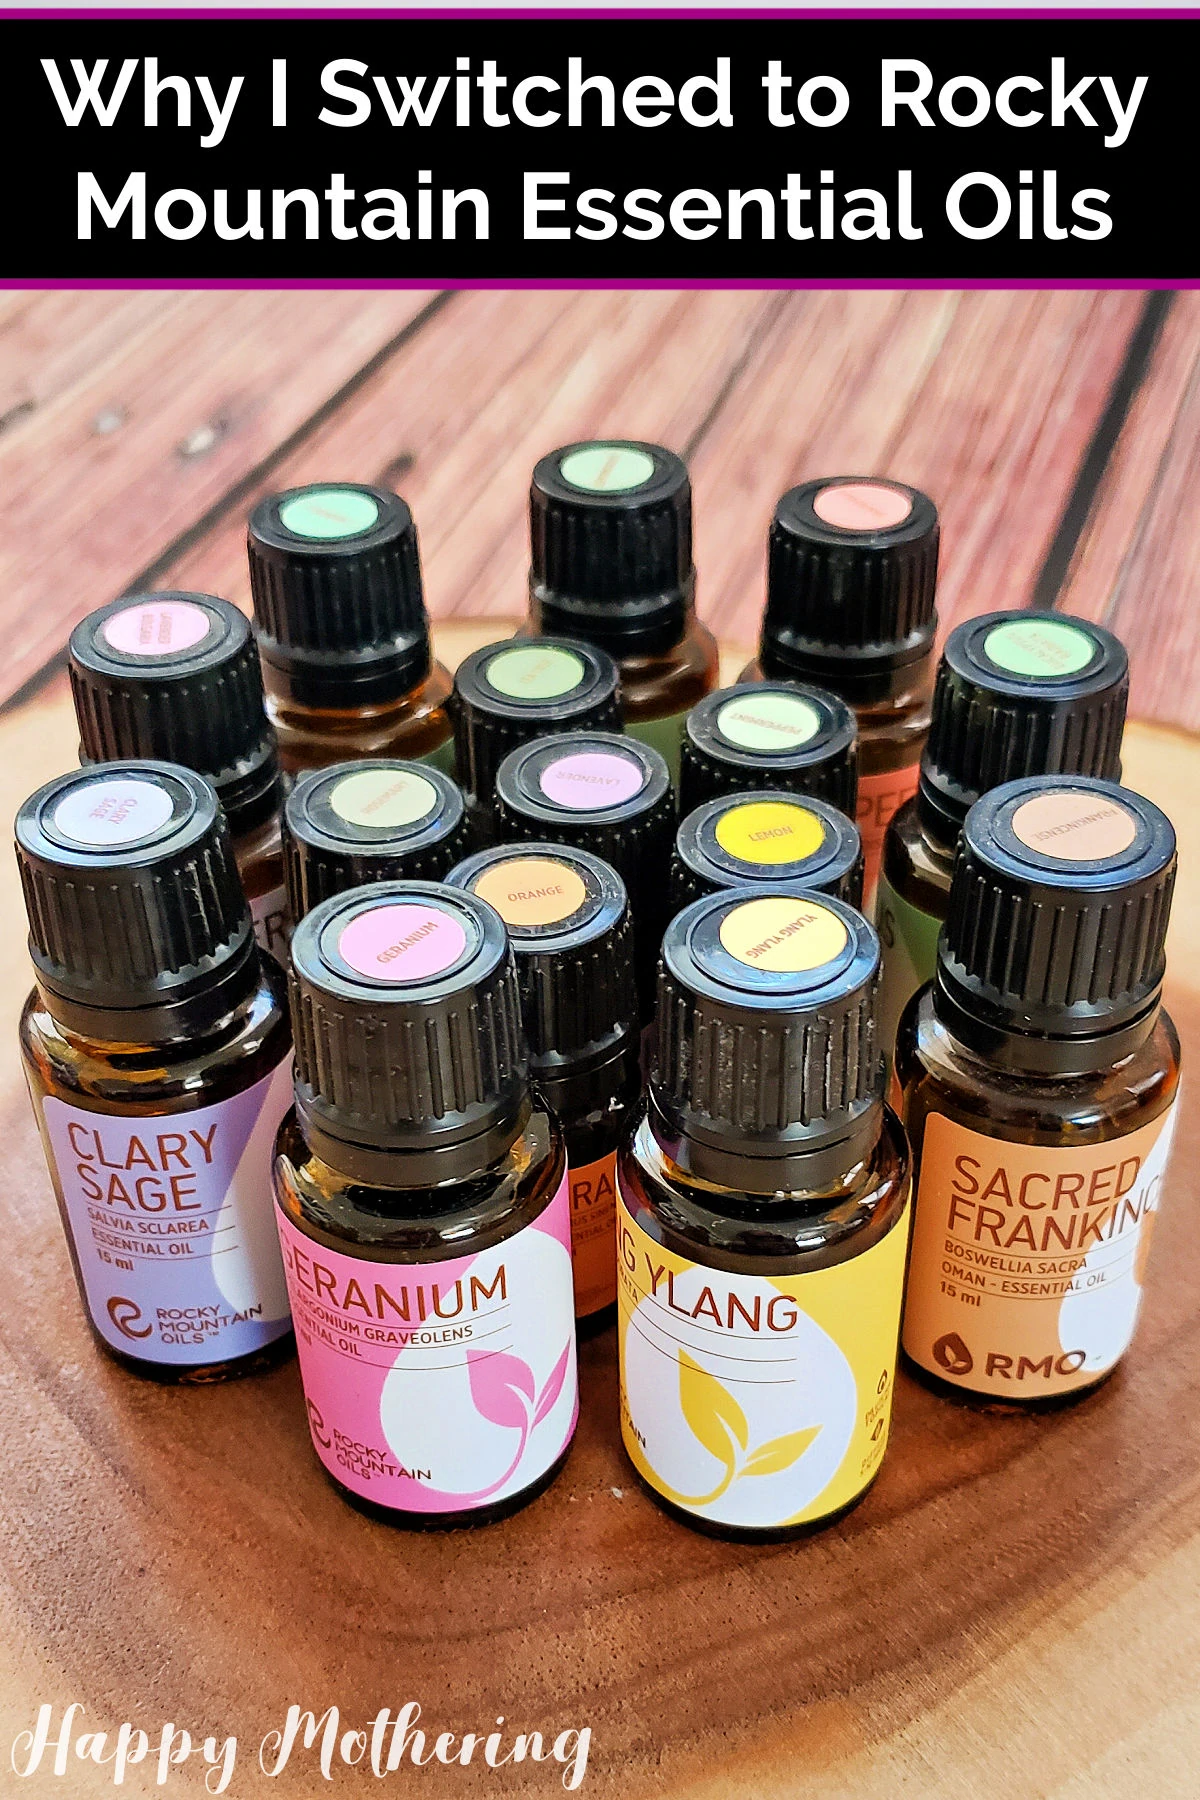 Several bottles of Rocky Mountain Essential Oils on a wood block.